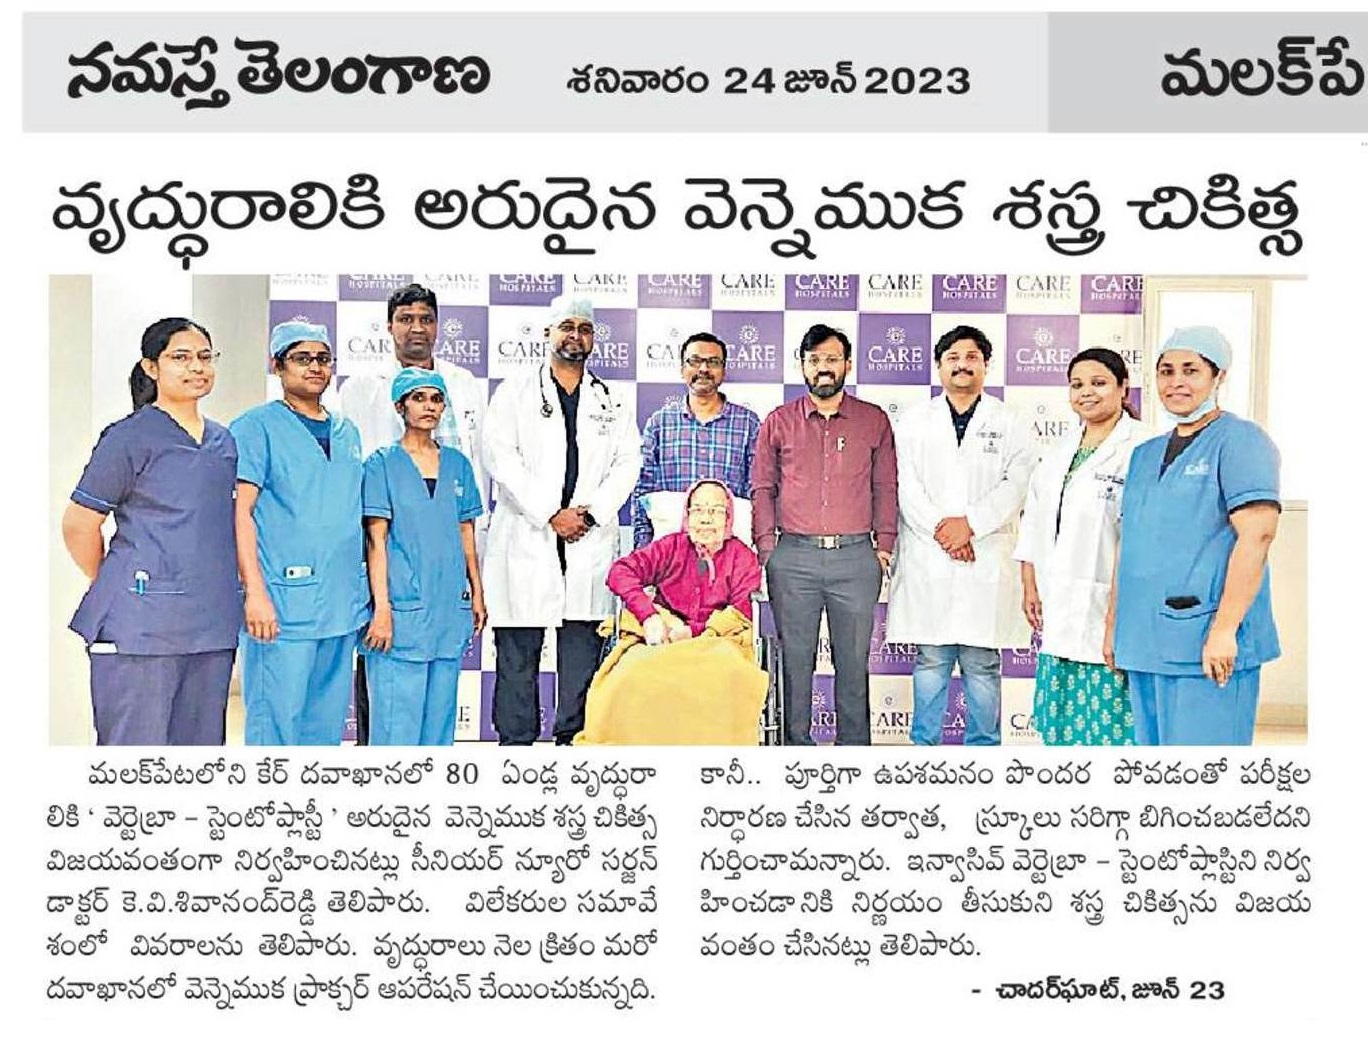 Rare Spinal Procedure Performed at CARE Hospitals Malakpet News Coverage in Namasthee Teleangana